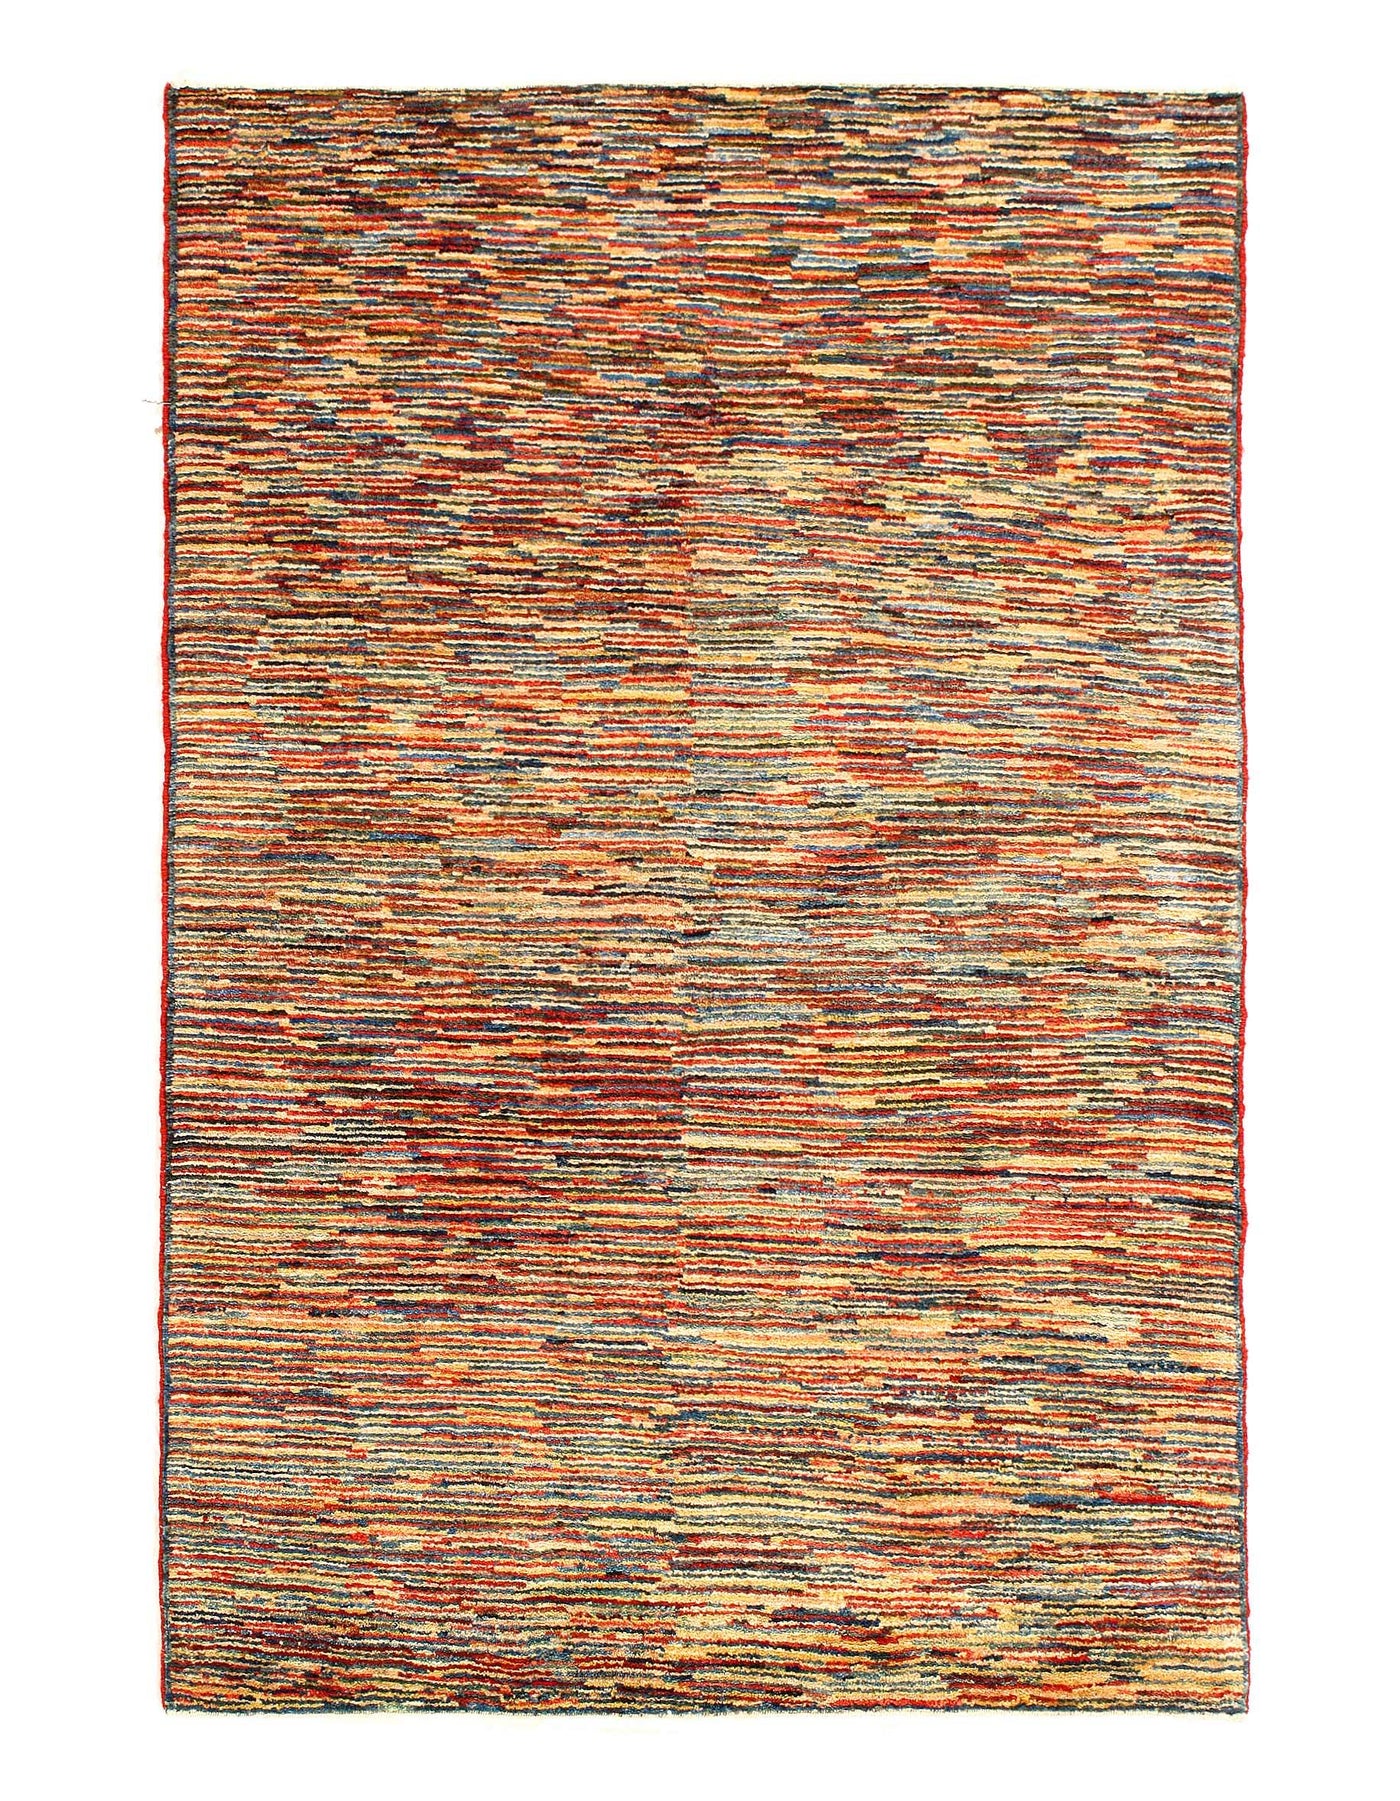 Fine Persian hand knotted Gabbeh - 2'10" X 4'4"